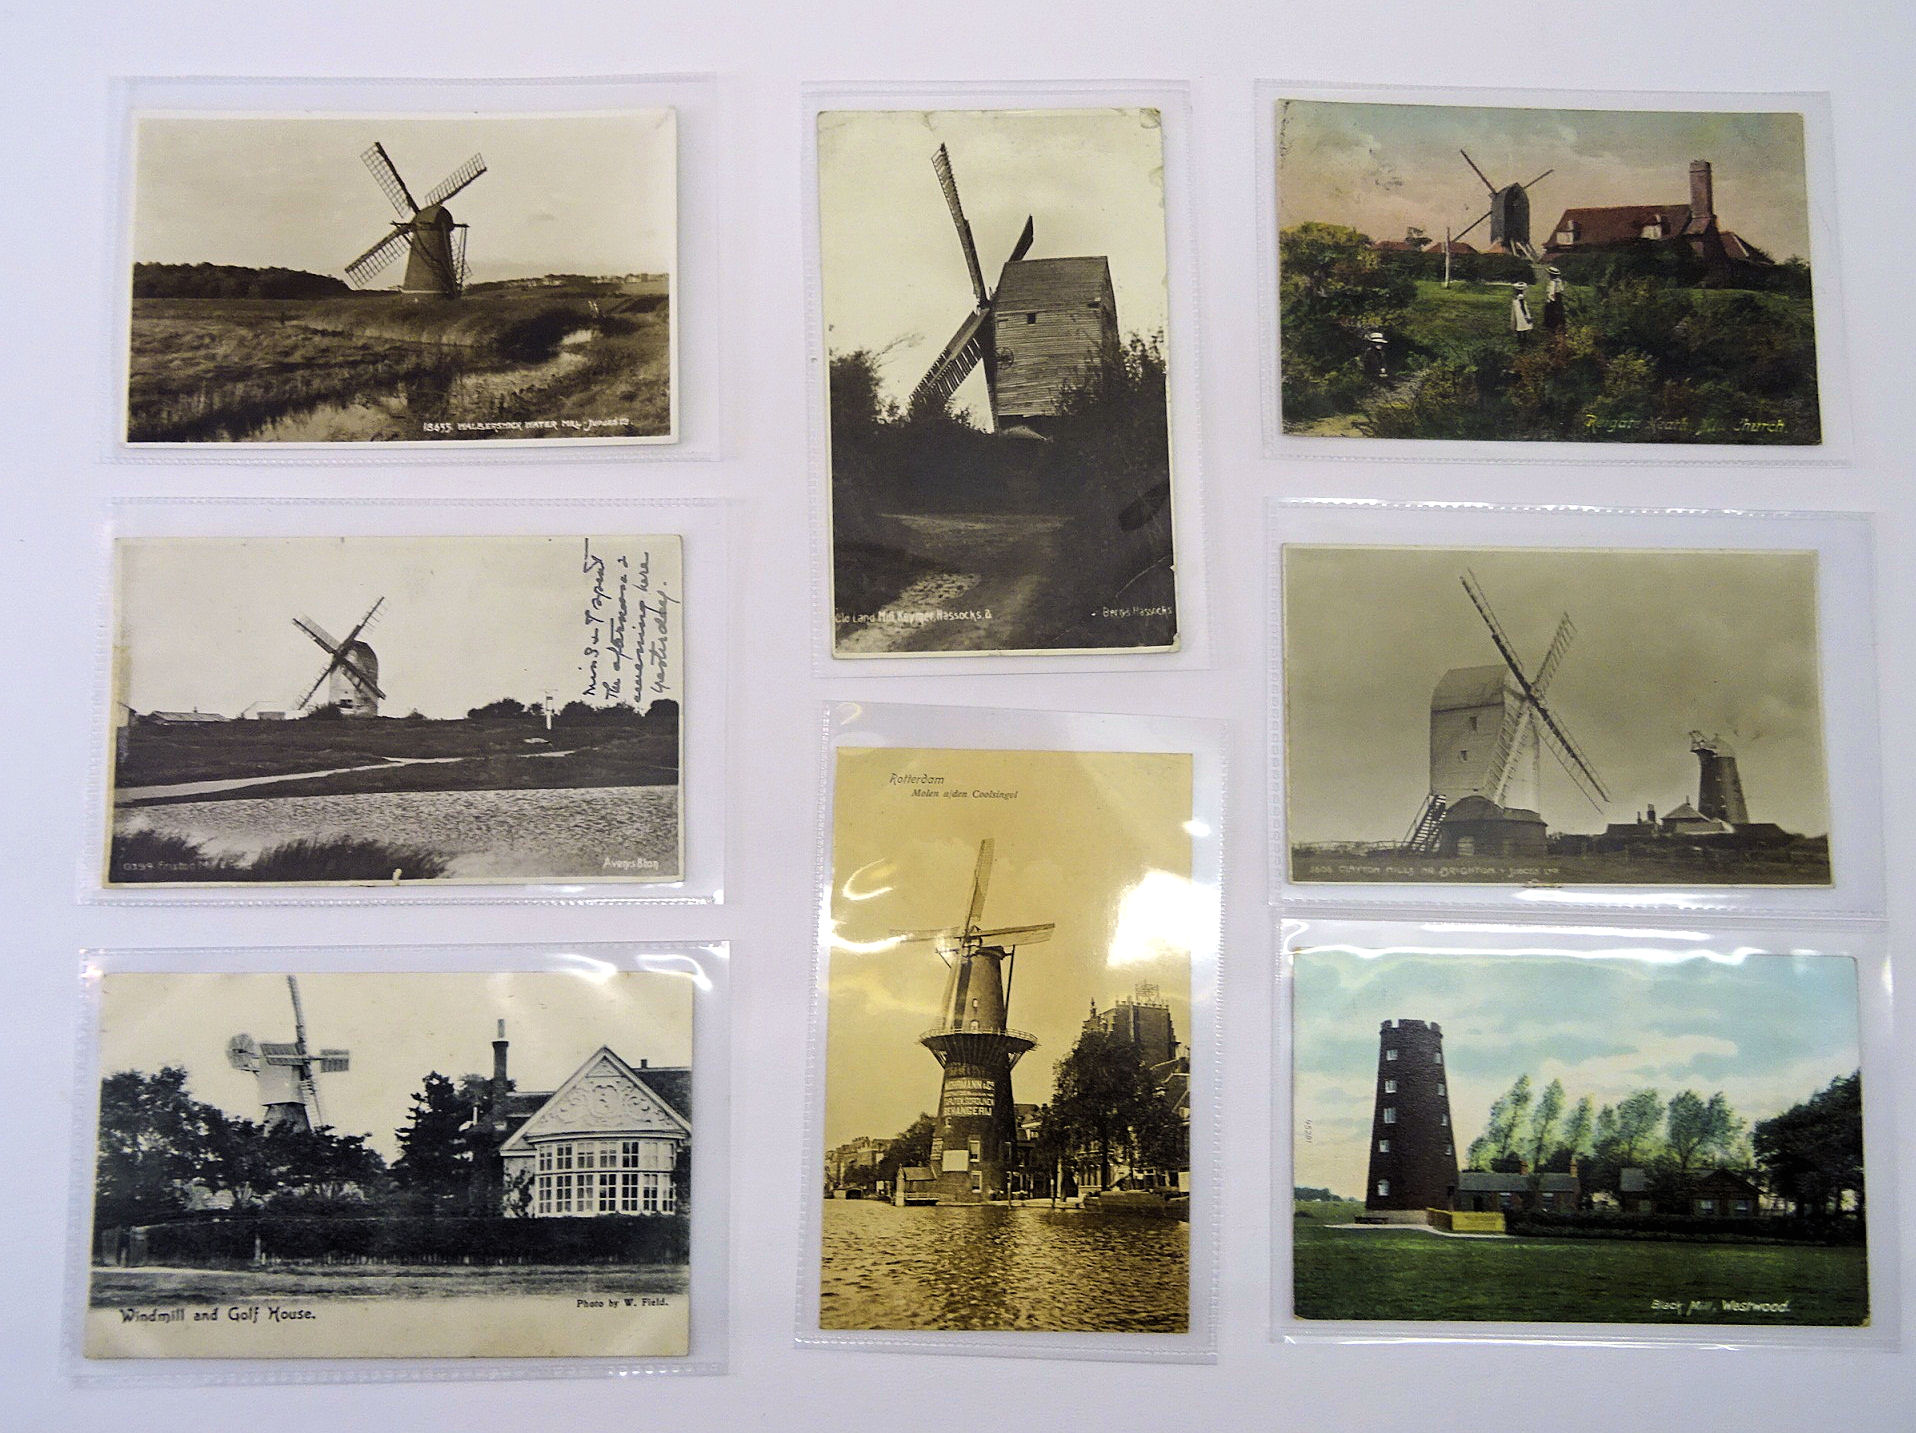 A collection of thirty five Vintage Postcards depicting windmills.